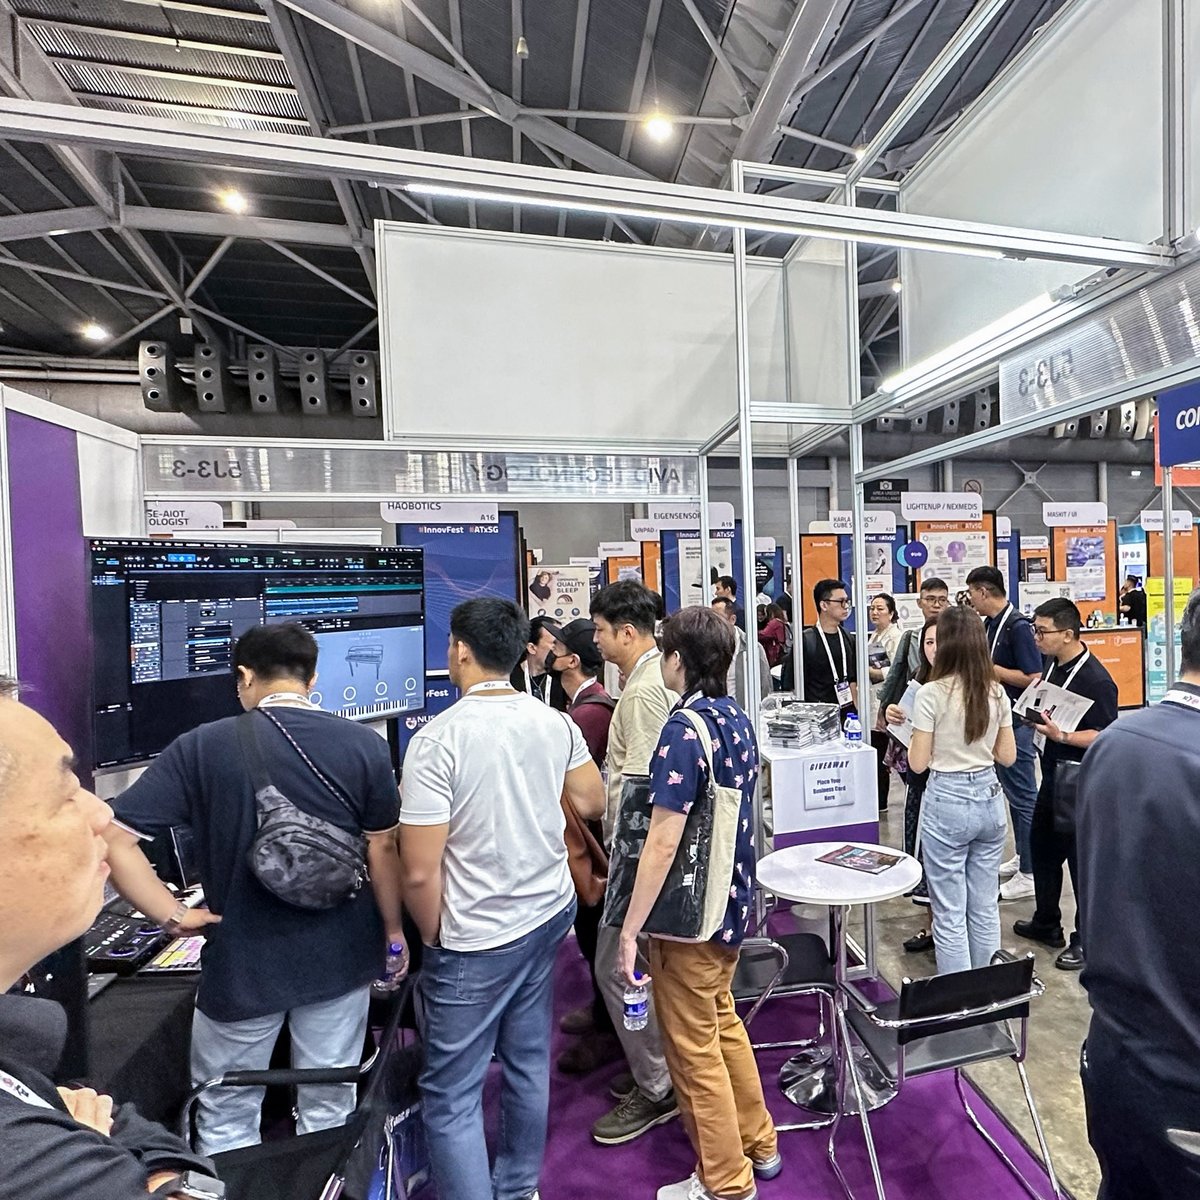 We're wrapping up Day 2 at #BroadcastAsia! Don't miss tomorrow's last day at the Avid booth (5J3-3) 👉 Discover Avid Ada for news and post-production and explore our latest Media Composer enhancements and Pro Tools features. #avid #avidada #protools #mediacomposer #avidnexis